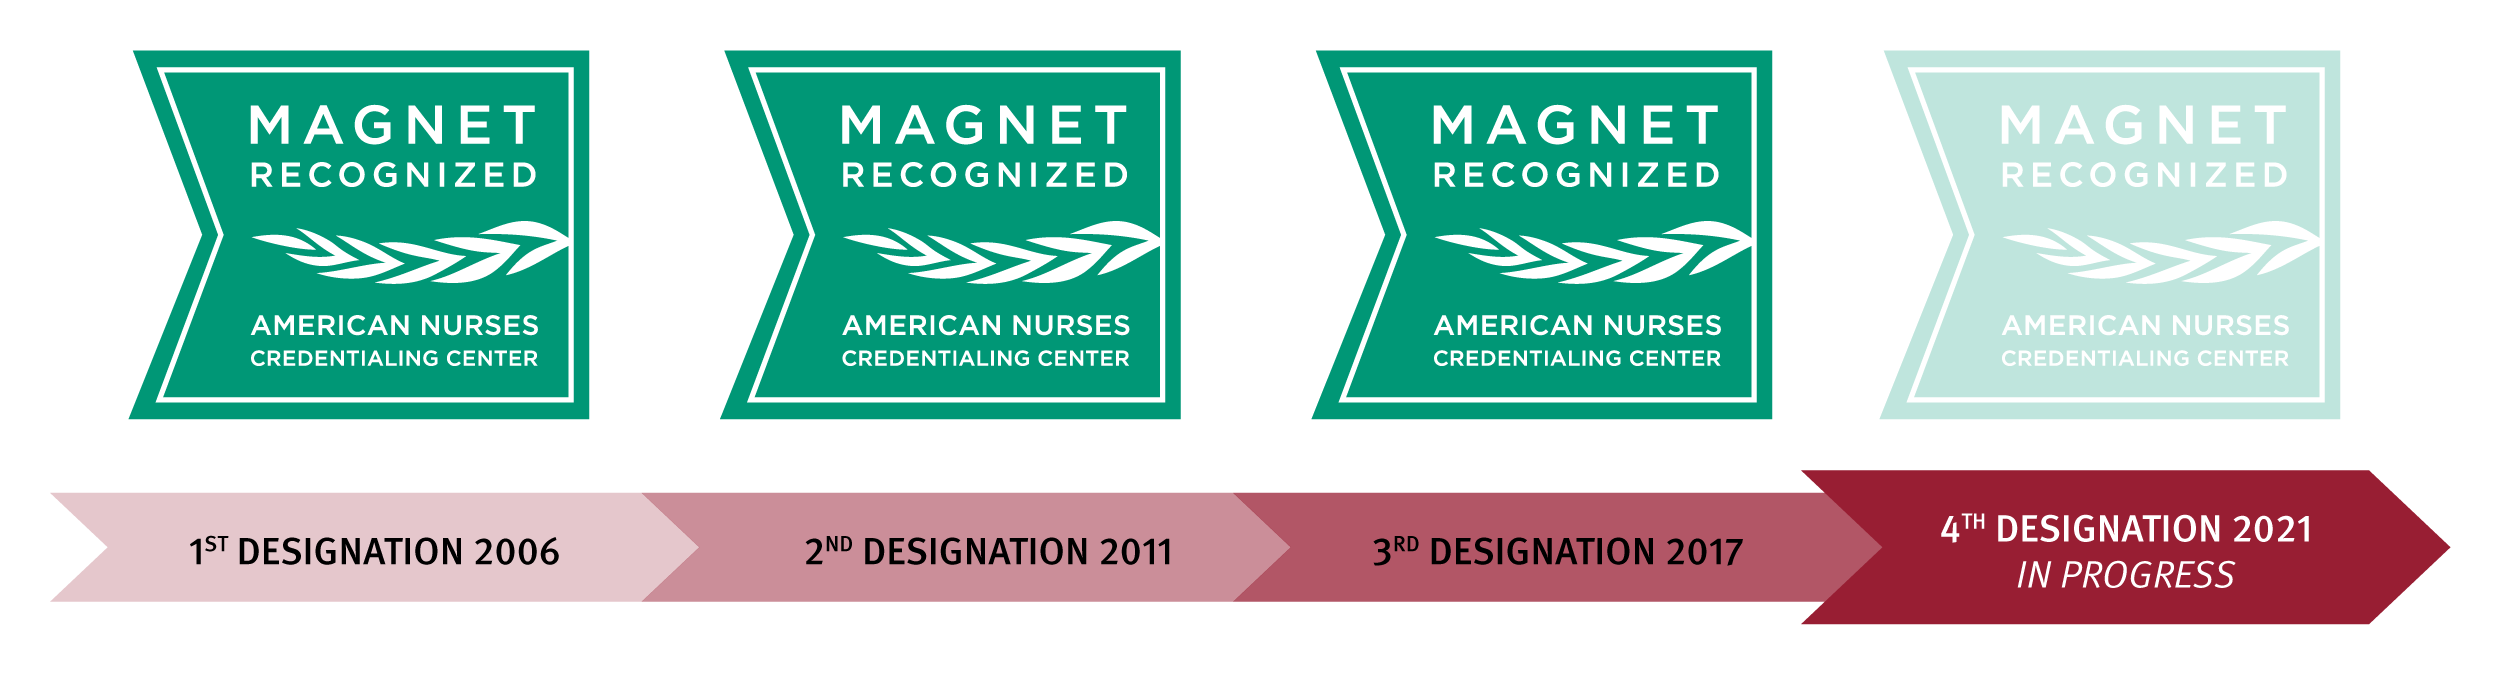 horizontal chart illustrating the magnet journey from 1st designation in 2007 to 4th designation (in progress for 2020)